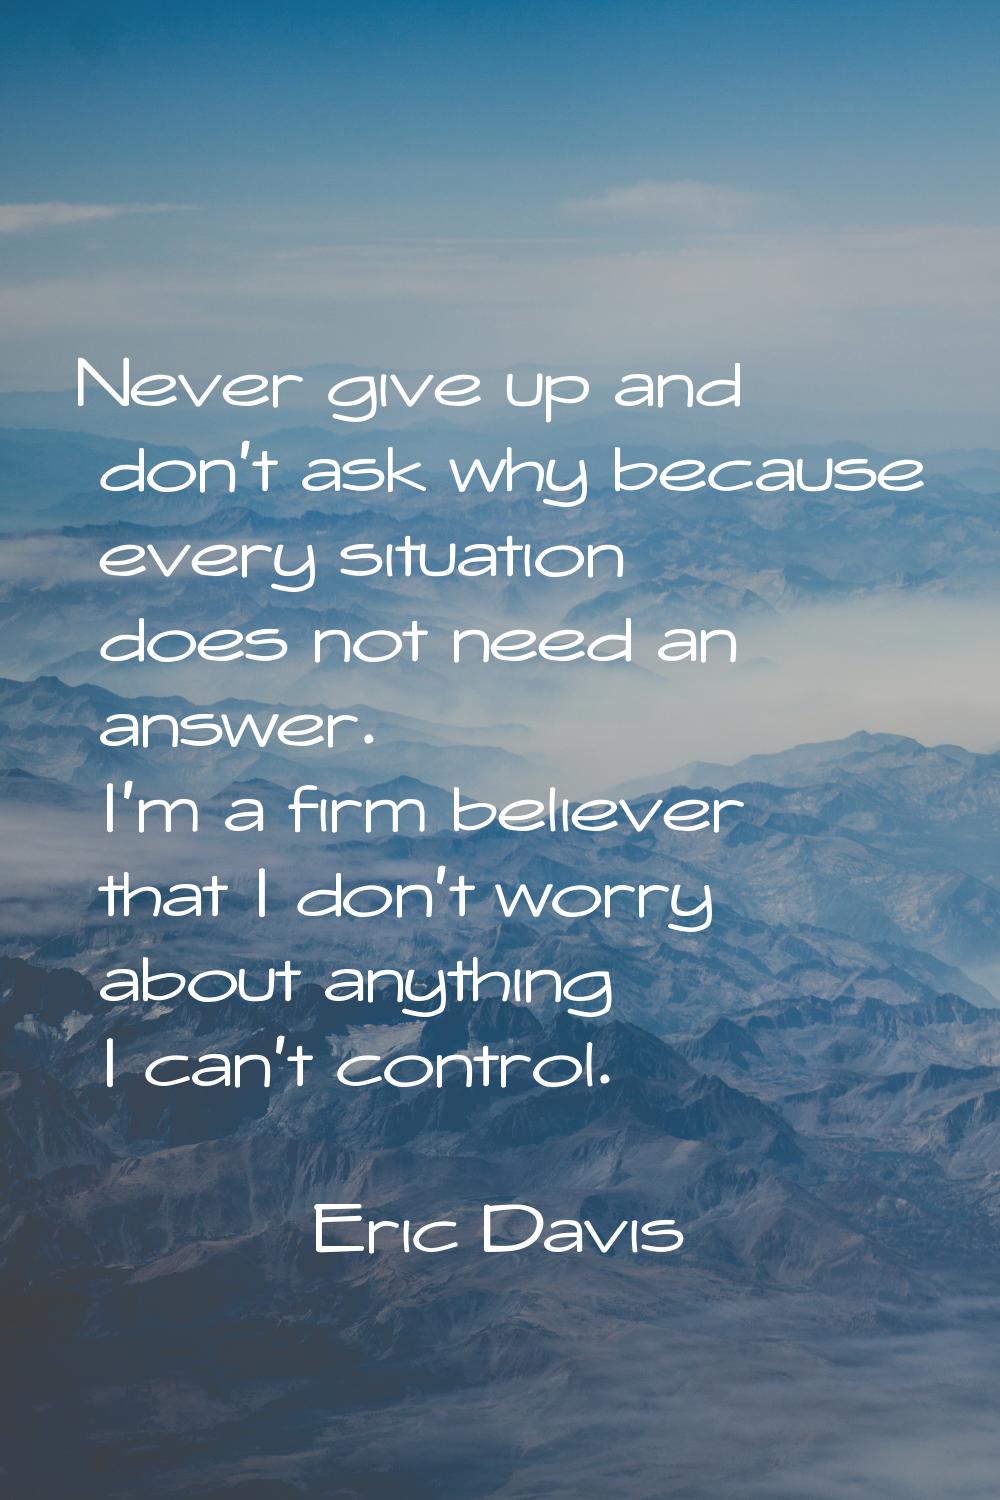 Never give up and don't ask why because every situation does not need an answer. I'm a firm believe